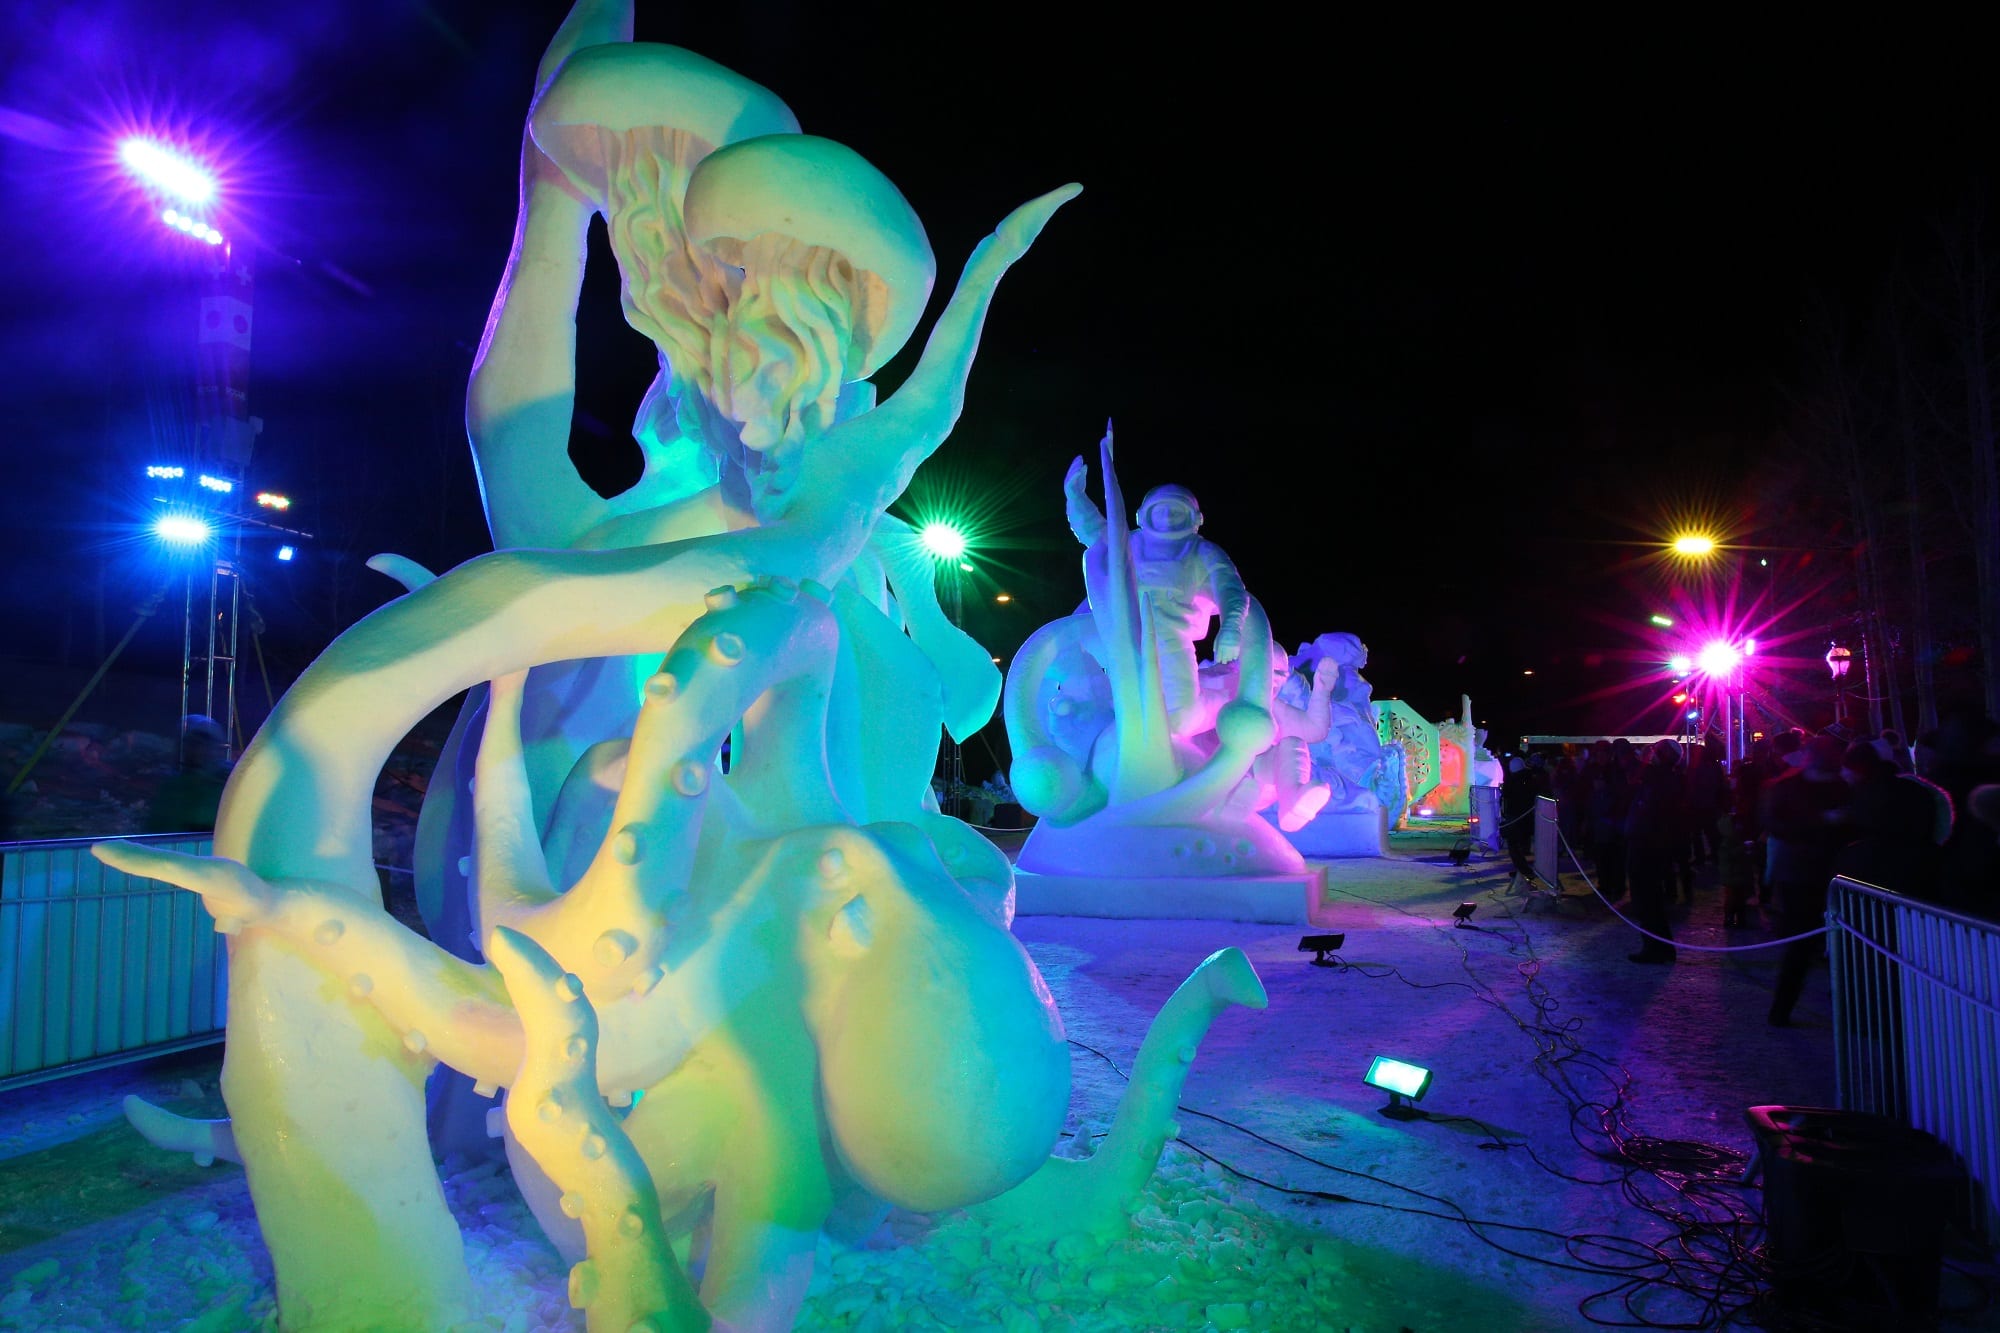 Lights during nighttime at the International Snow Sculpture Championships in Breckenridge 